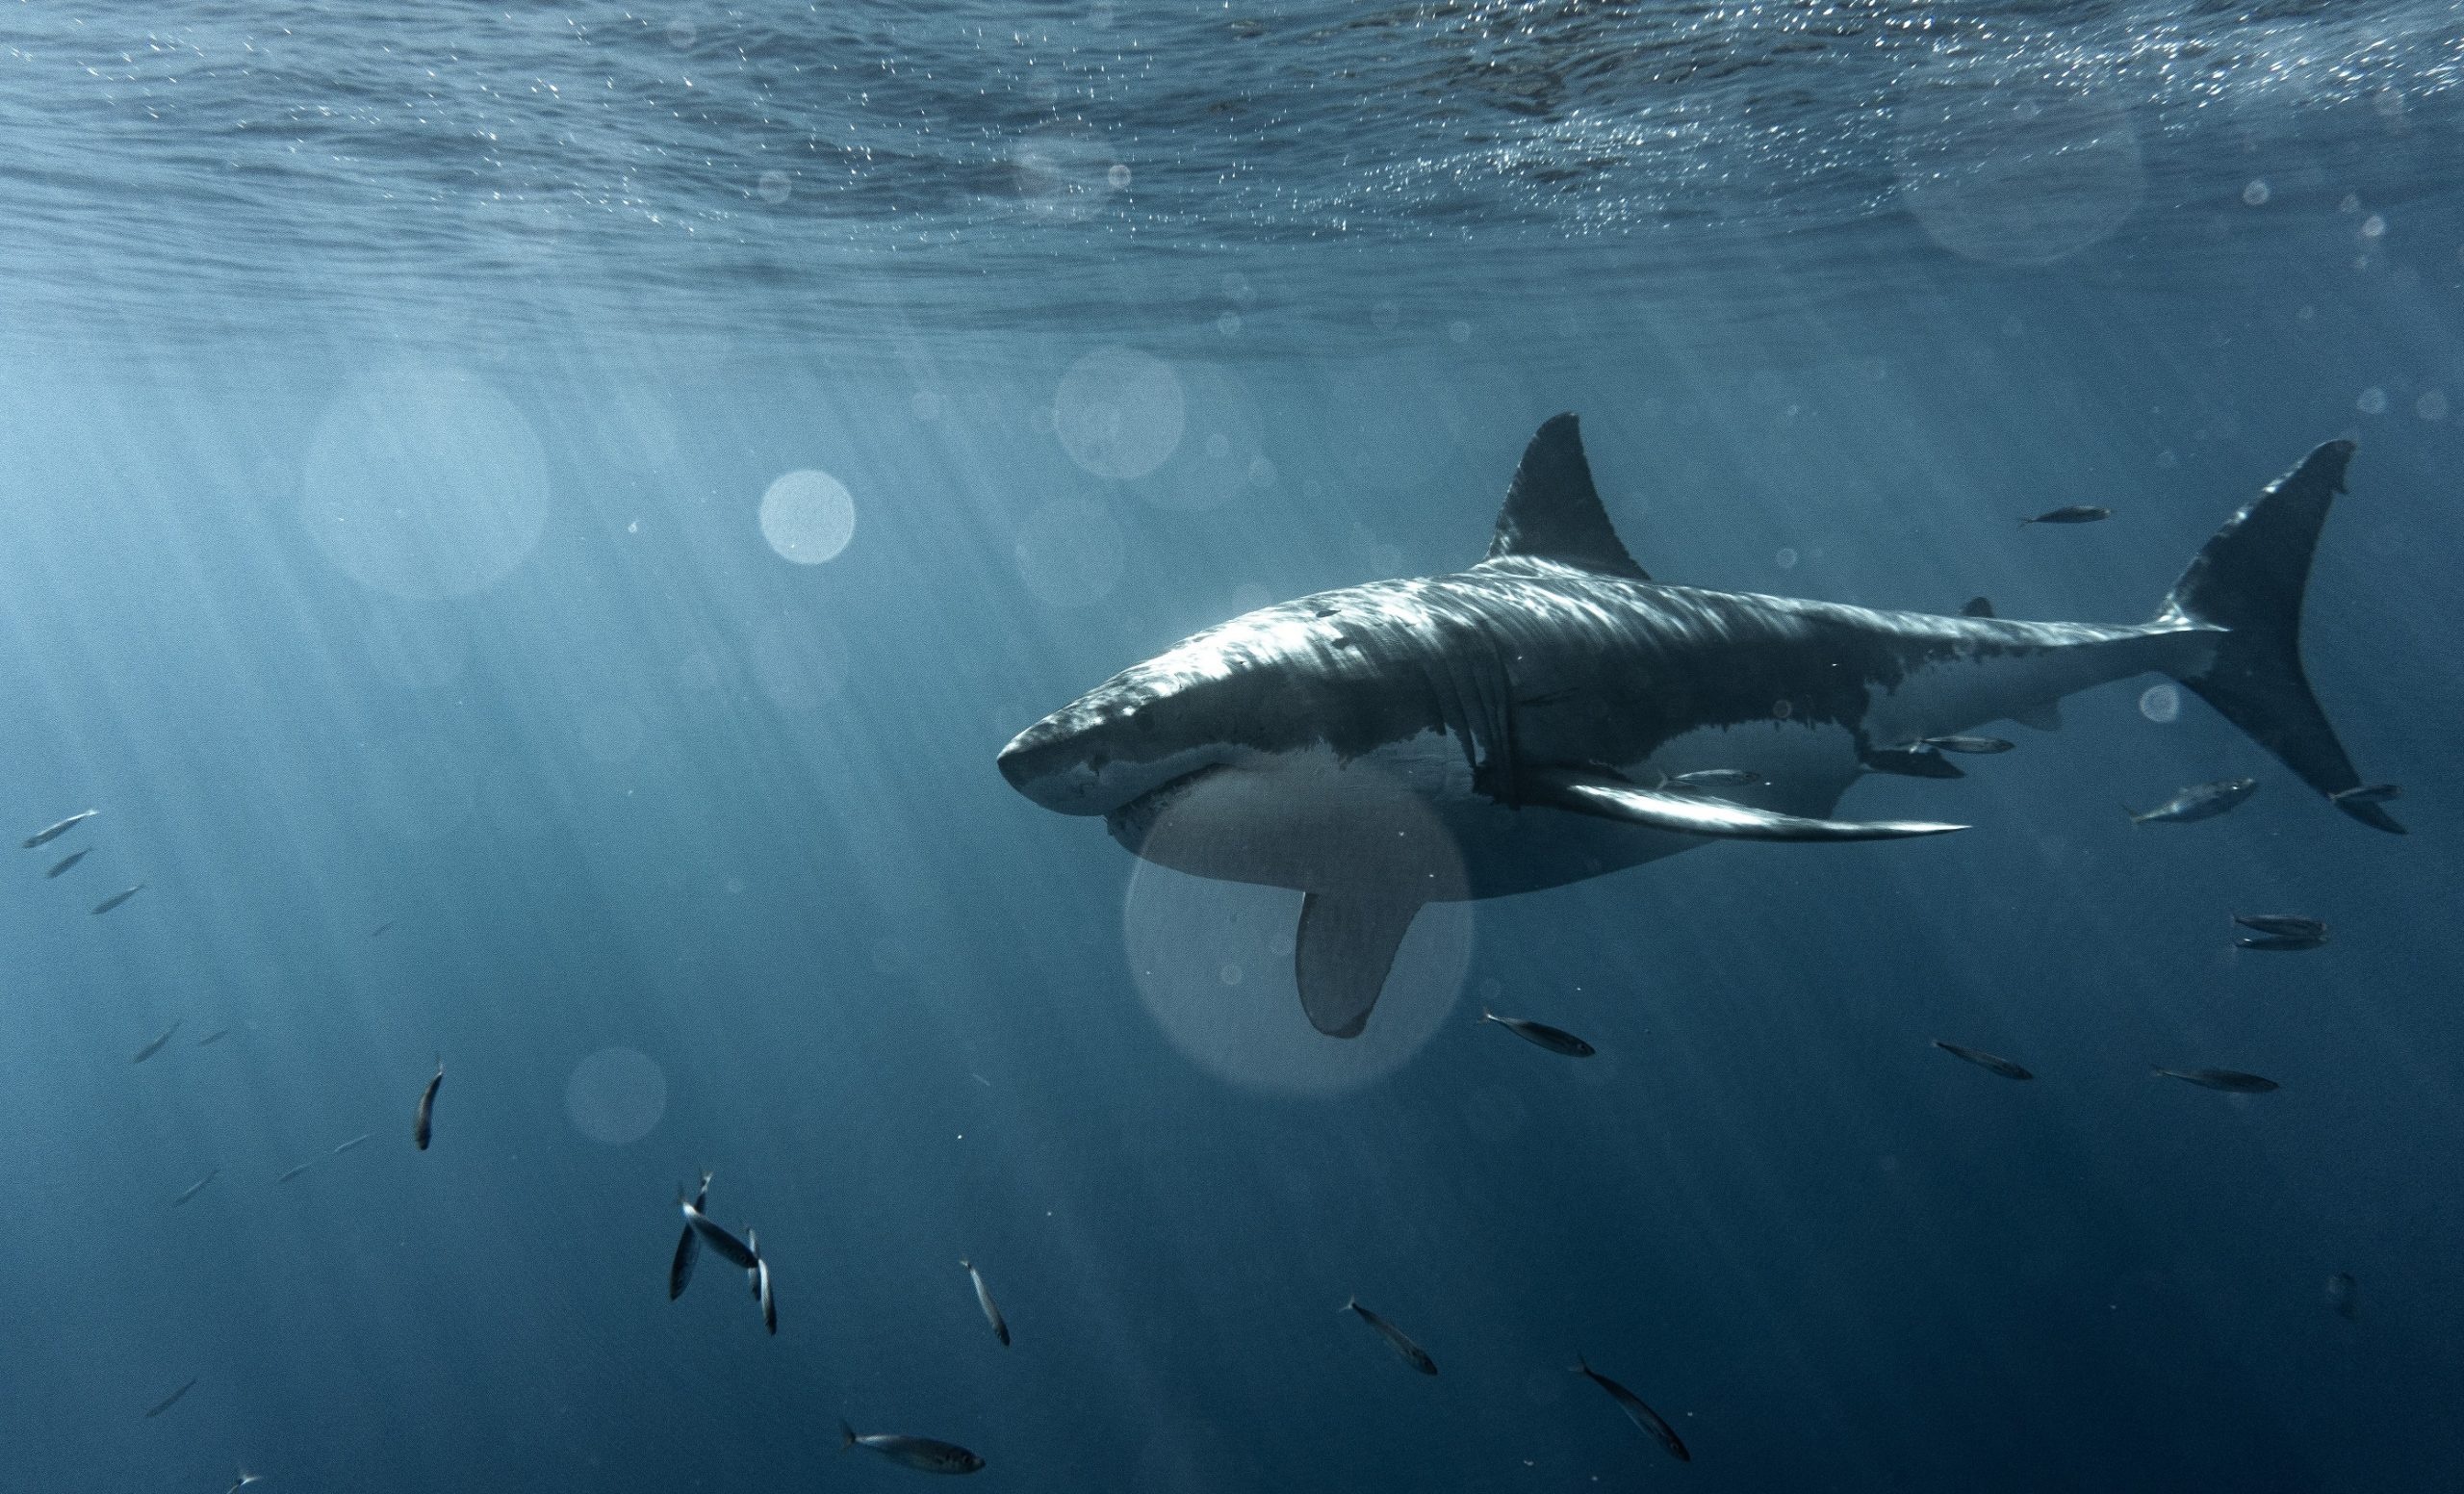 Great White Shark: The only known surviving species of its genus Carcharodon, Dangerous jaws. 2560x1560 HD Wallpaper.